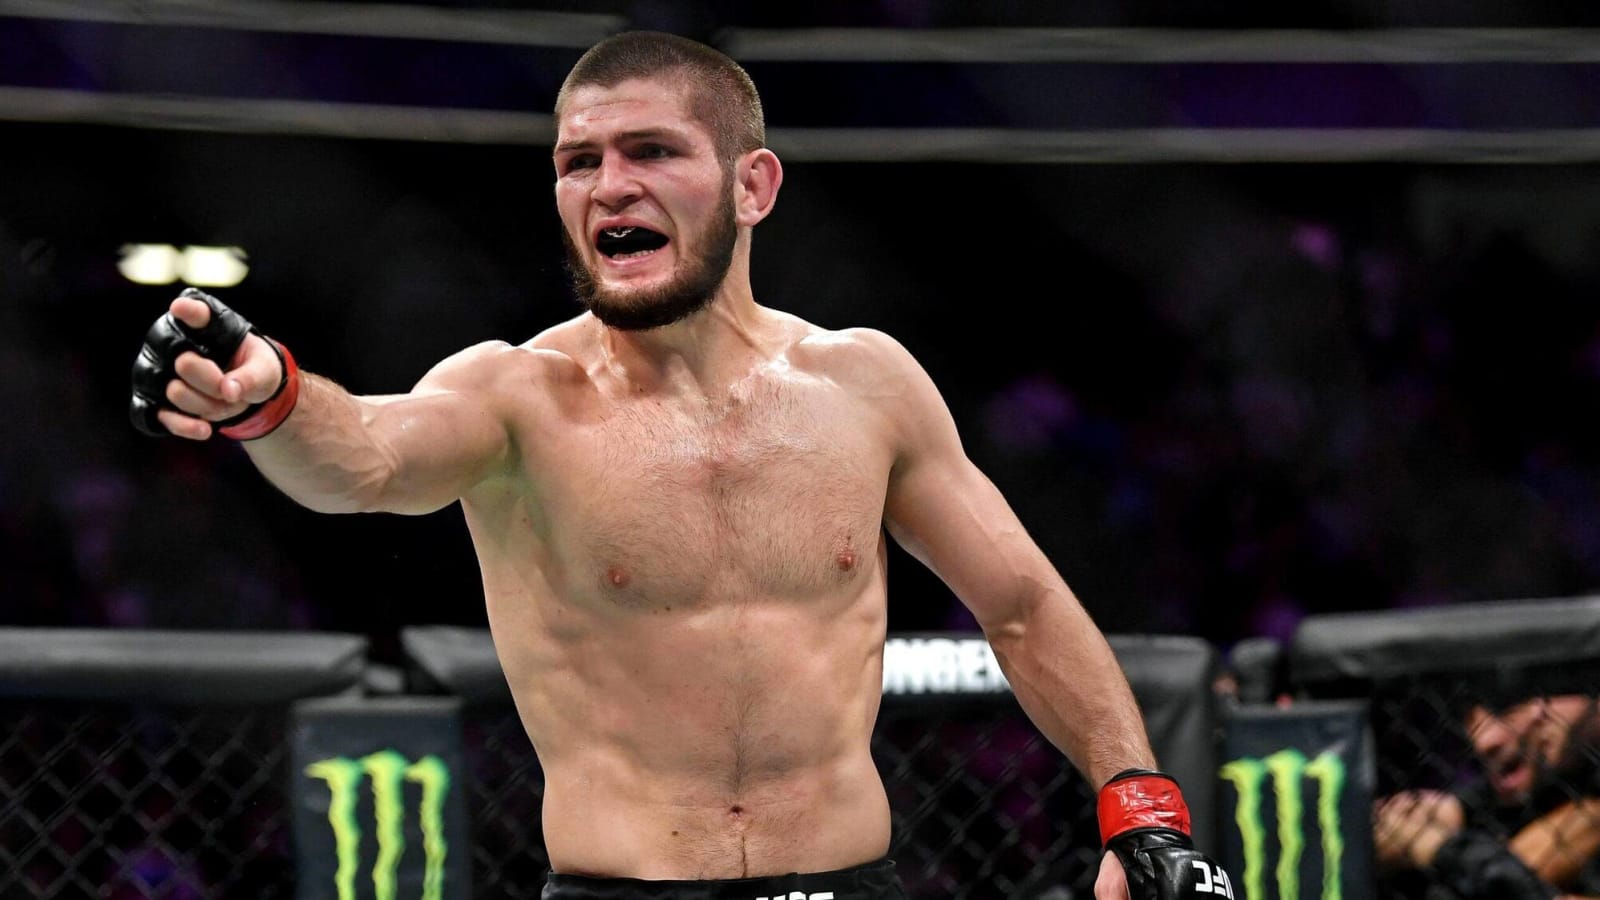 Will Khabib Nurmagomedov’s Tax Debt Lead to a UFC Return? 3 Possible Opponents for ‘The Eagle’ Including Conor McGregor